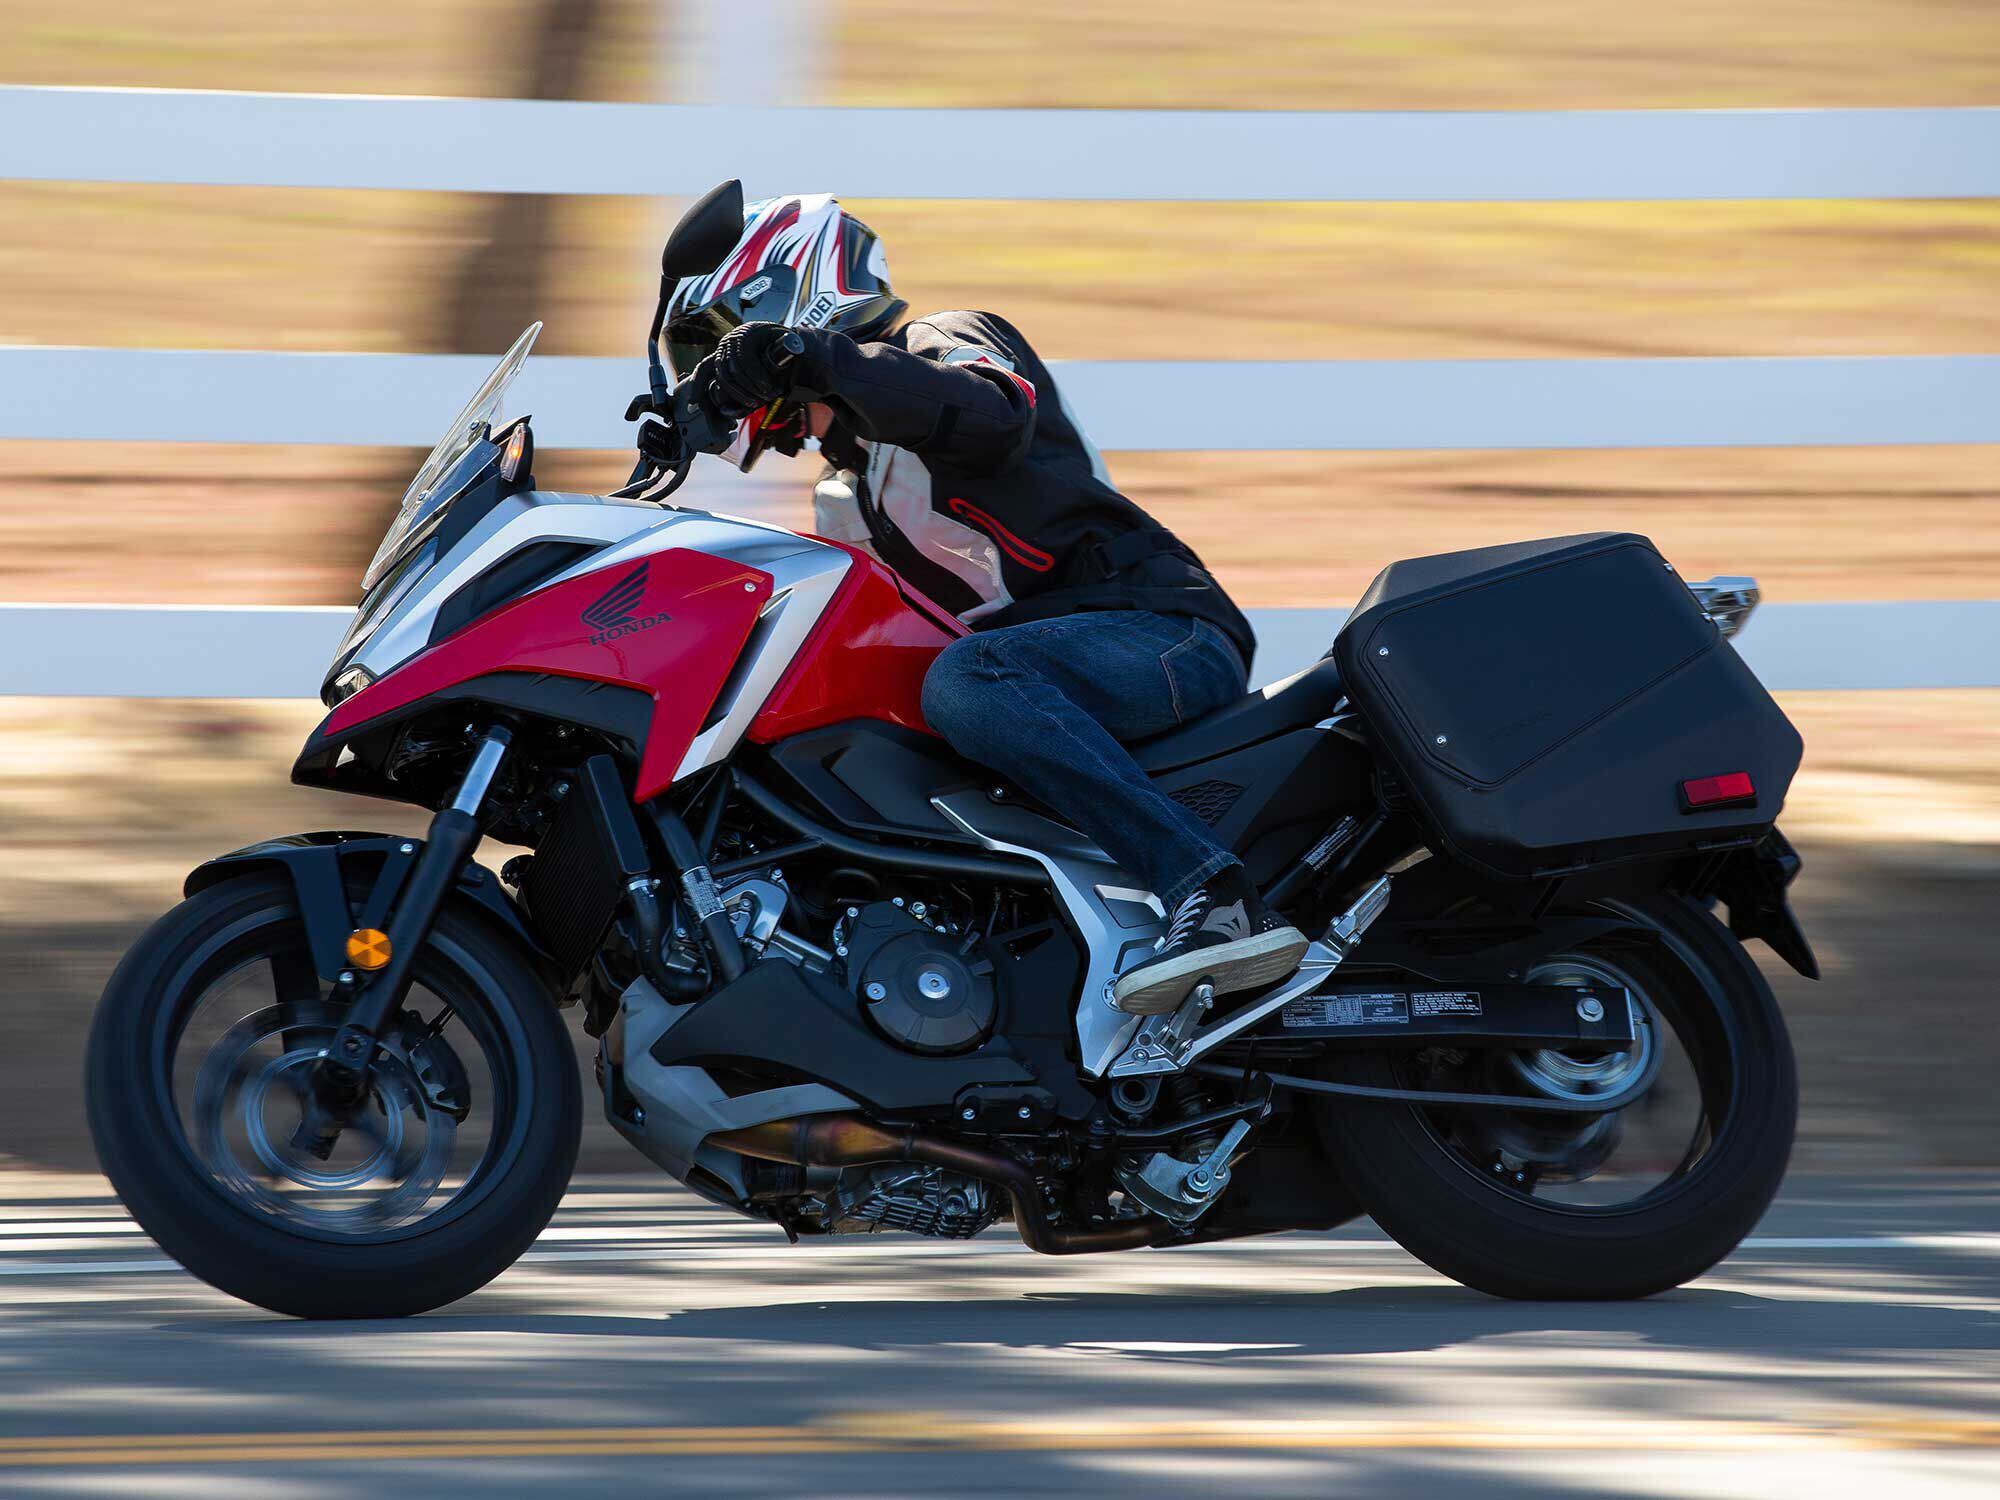 The NC750X makes for a great commuter, but won't shy away from longer rides or a fun day on twisty canyon roads.